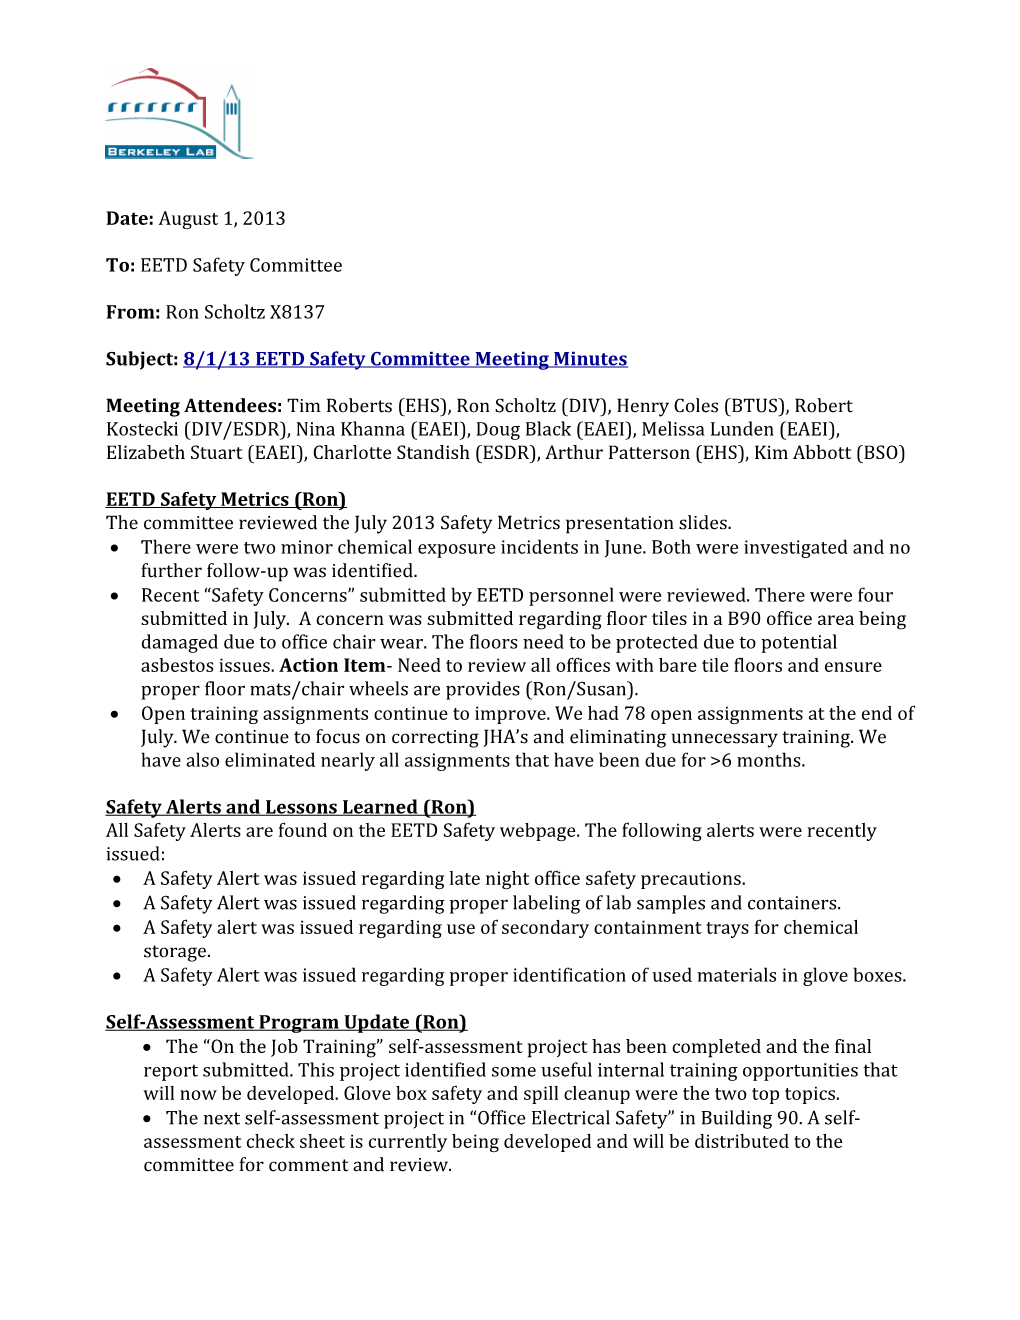 Subject:8/1/13 EETD Safety Committee Meeting Minutes